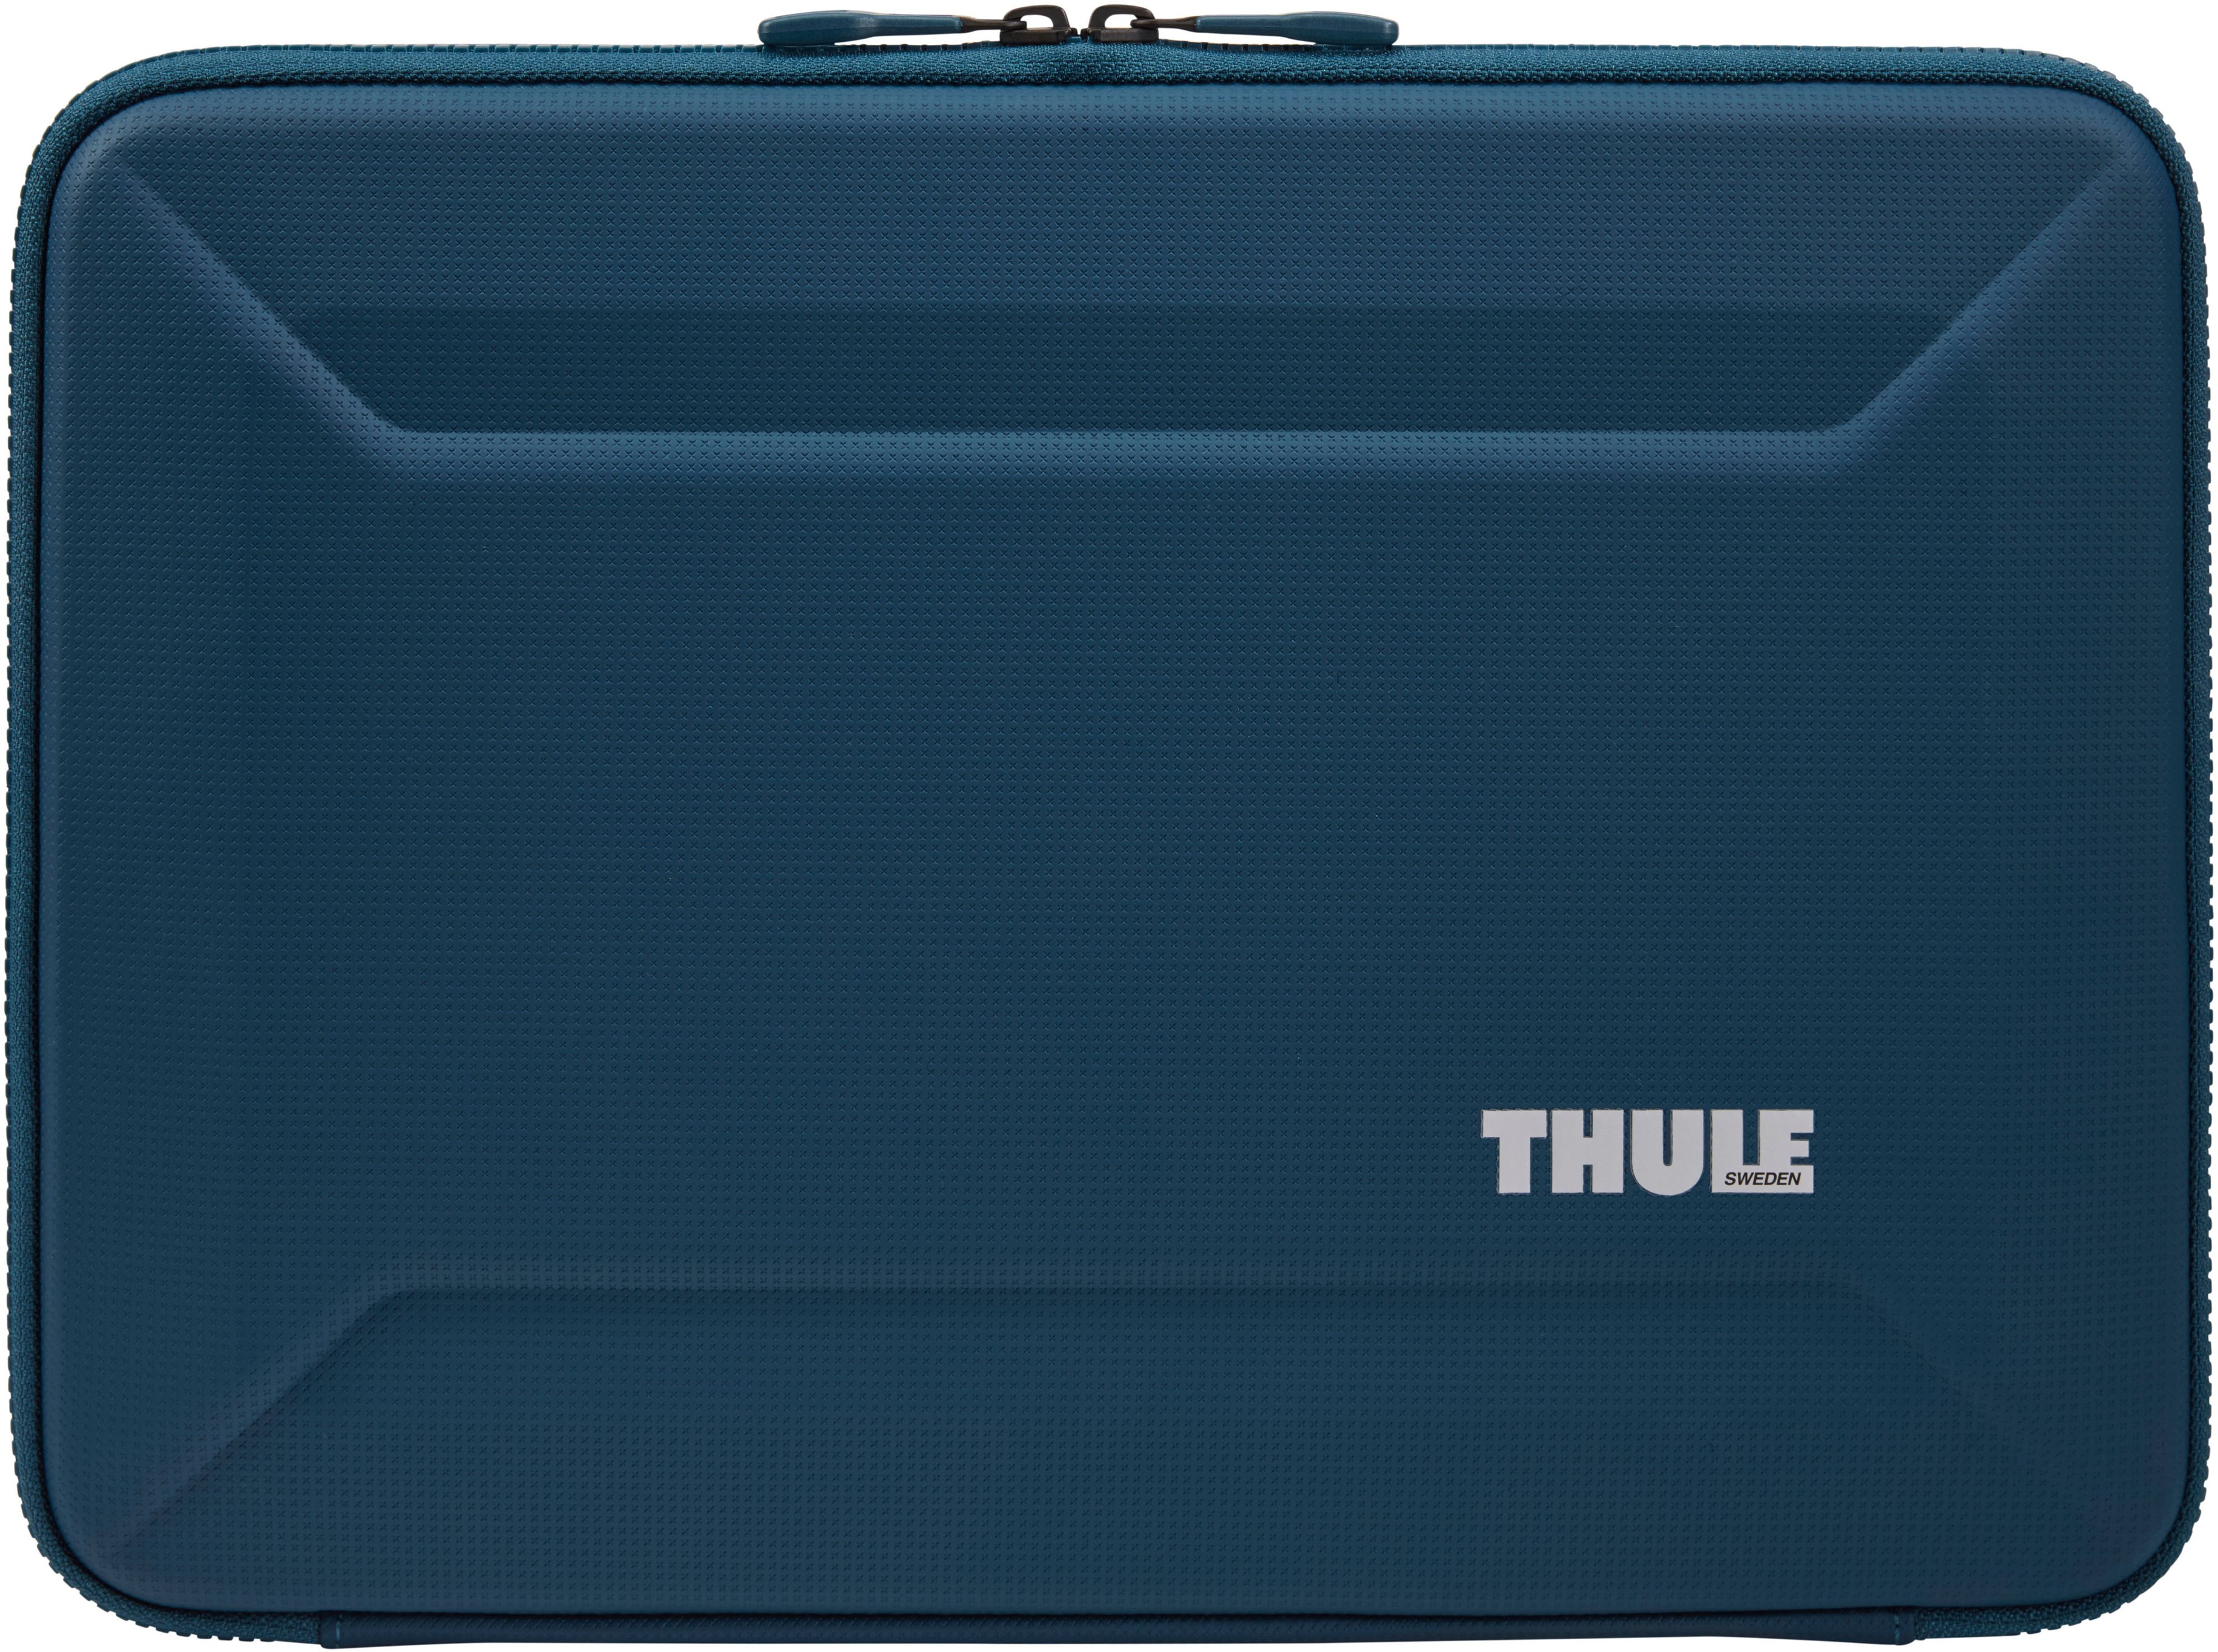 Thule - Gauntlet Sleeve for 16” Apple® MacBook Pro®, 15” Apple® MacBook Pro®, PCs/Laptops, and Chromebooks up to 14" - Blue